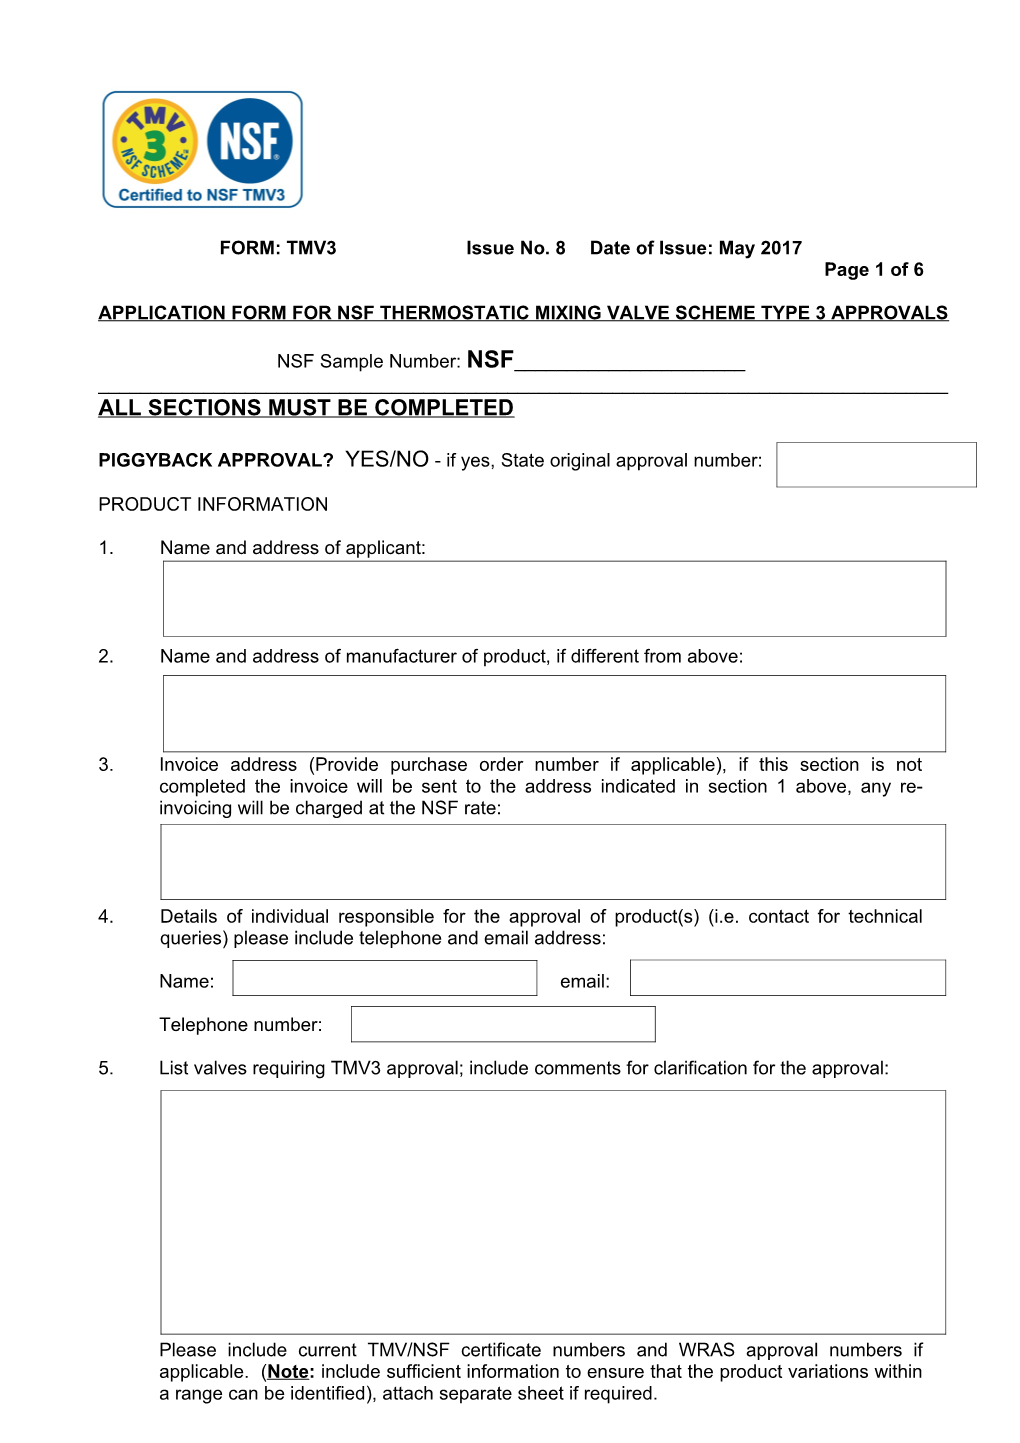 Application Form for Nsf Thermostatic Mixing Valve Scheme Type 3 Approvals s1